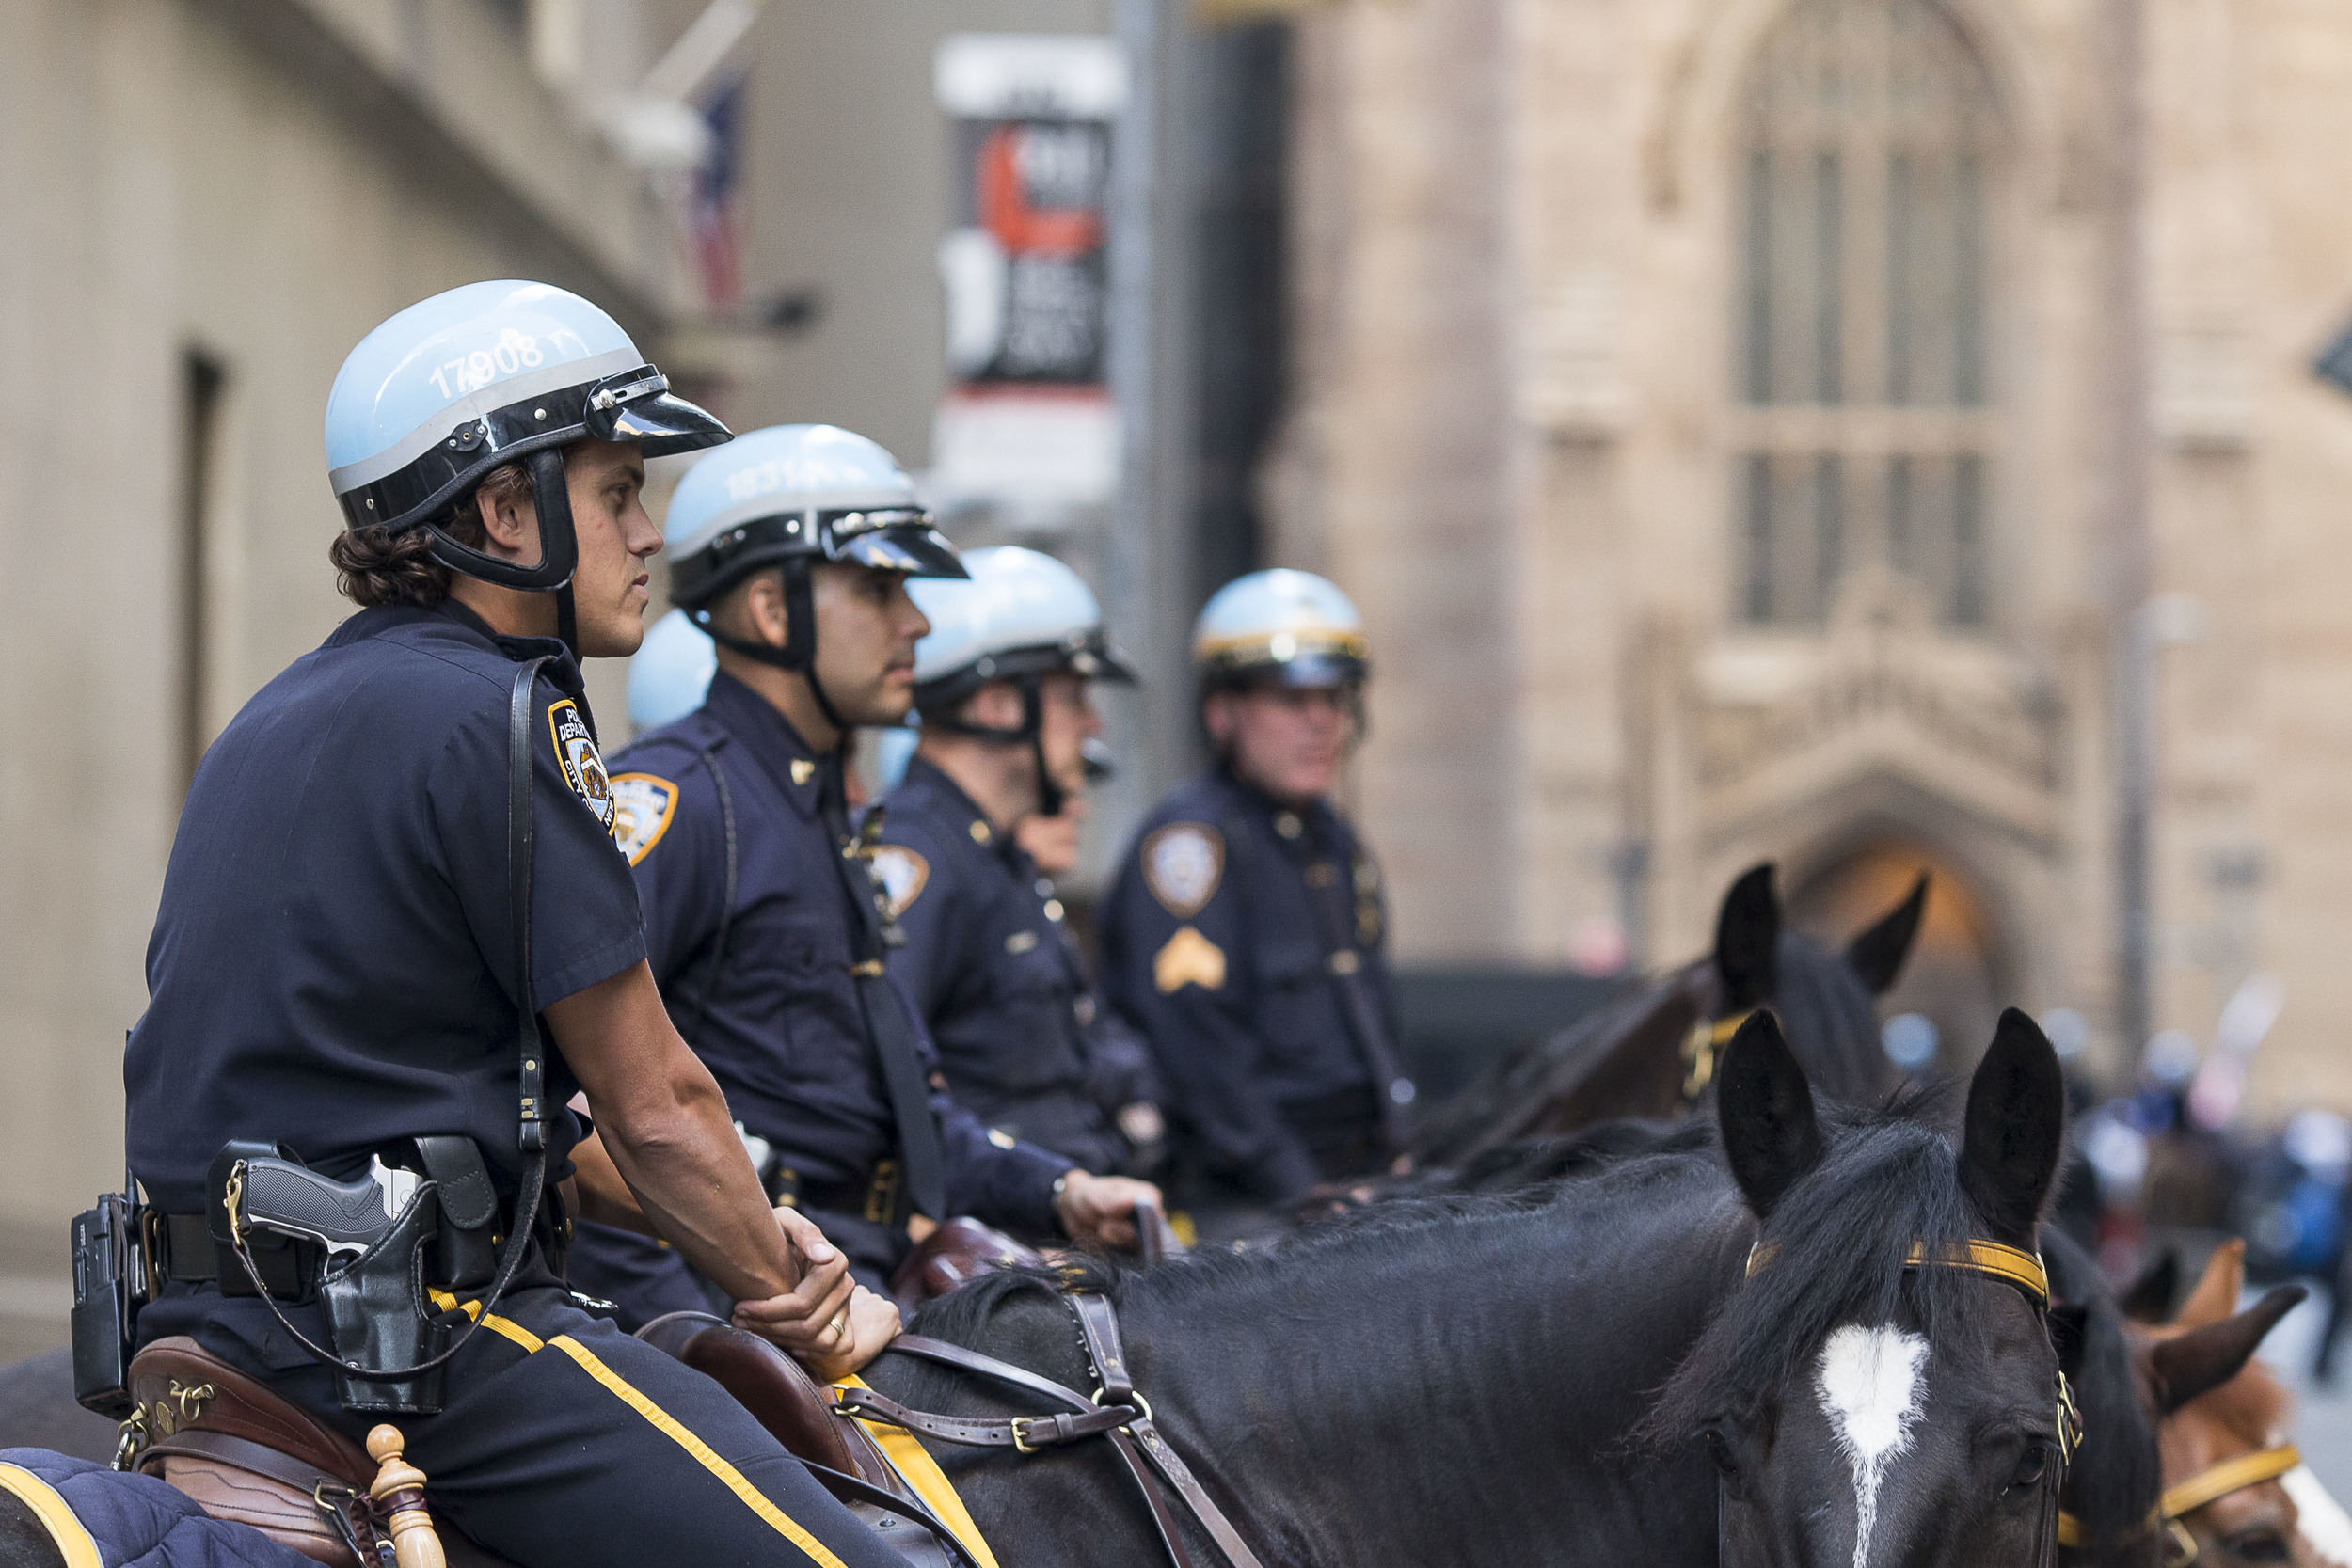  In anticipation of the protest, NYPD mounted patrolmen work to completely blockade the corner of Wall Street and Broad Street in front of the Stock Exchange. 